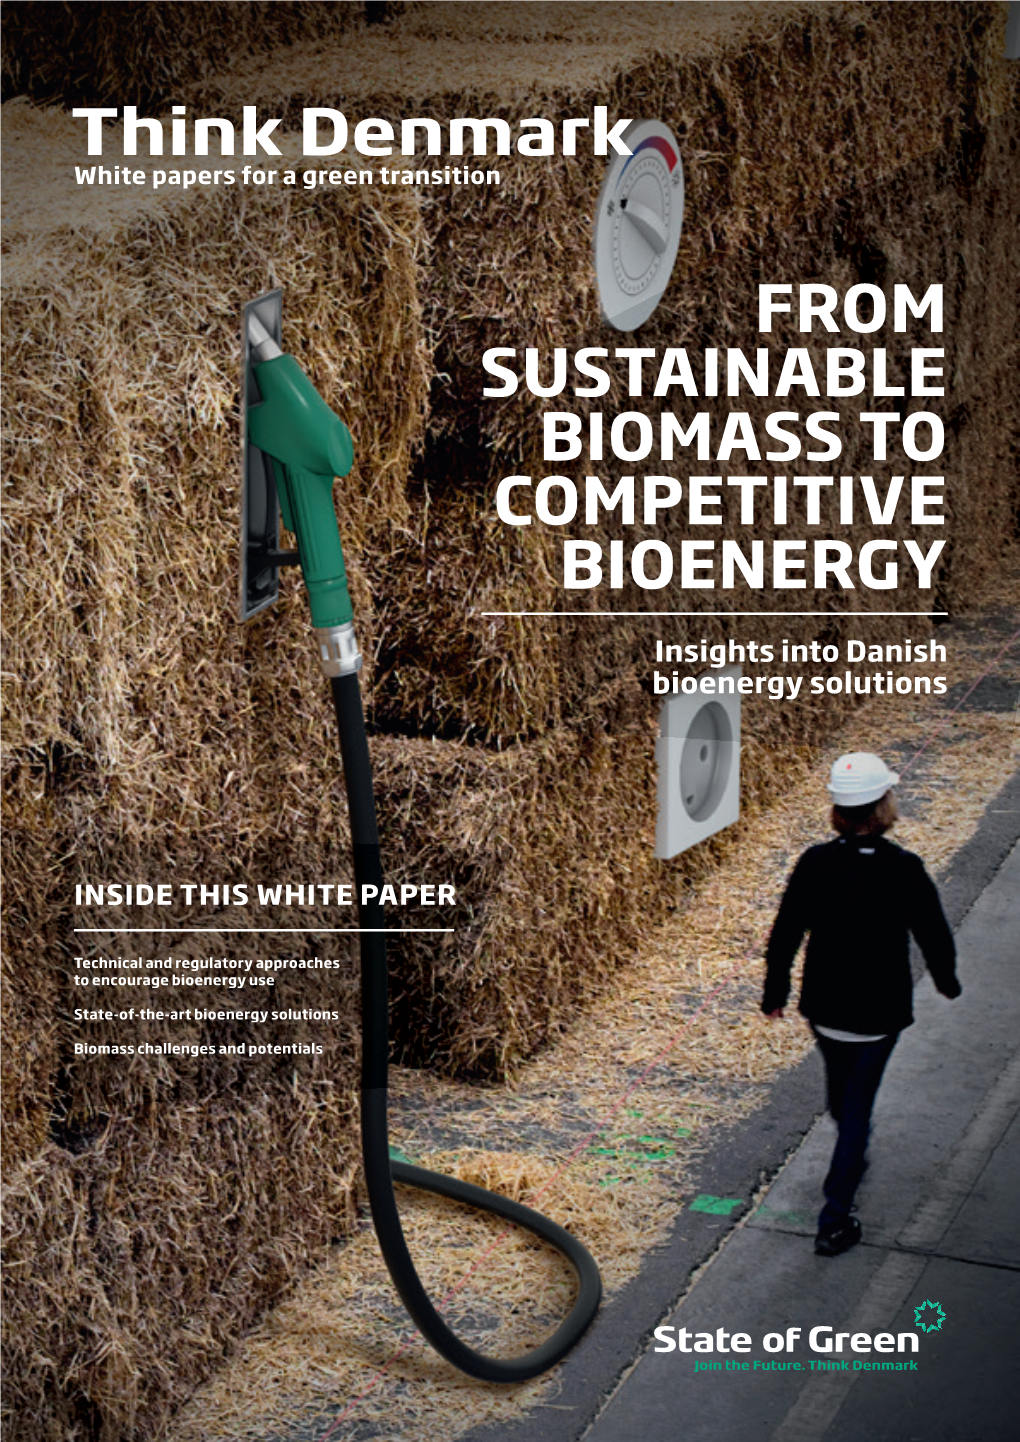 From Sustainable Biomass to Competitive Bioenergy